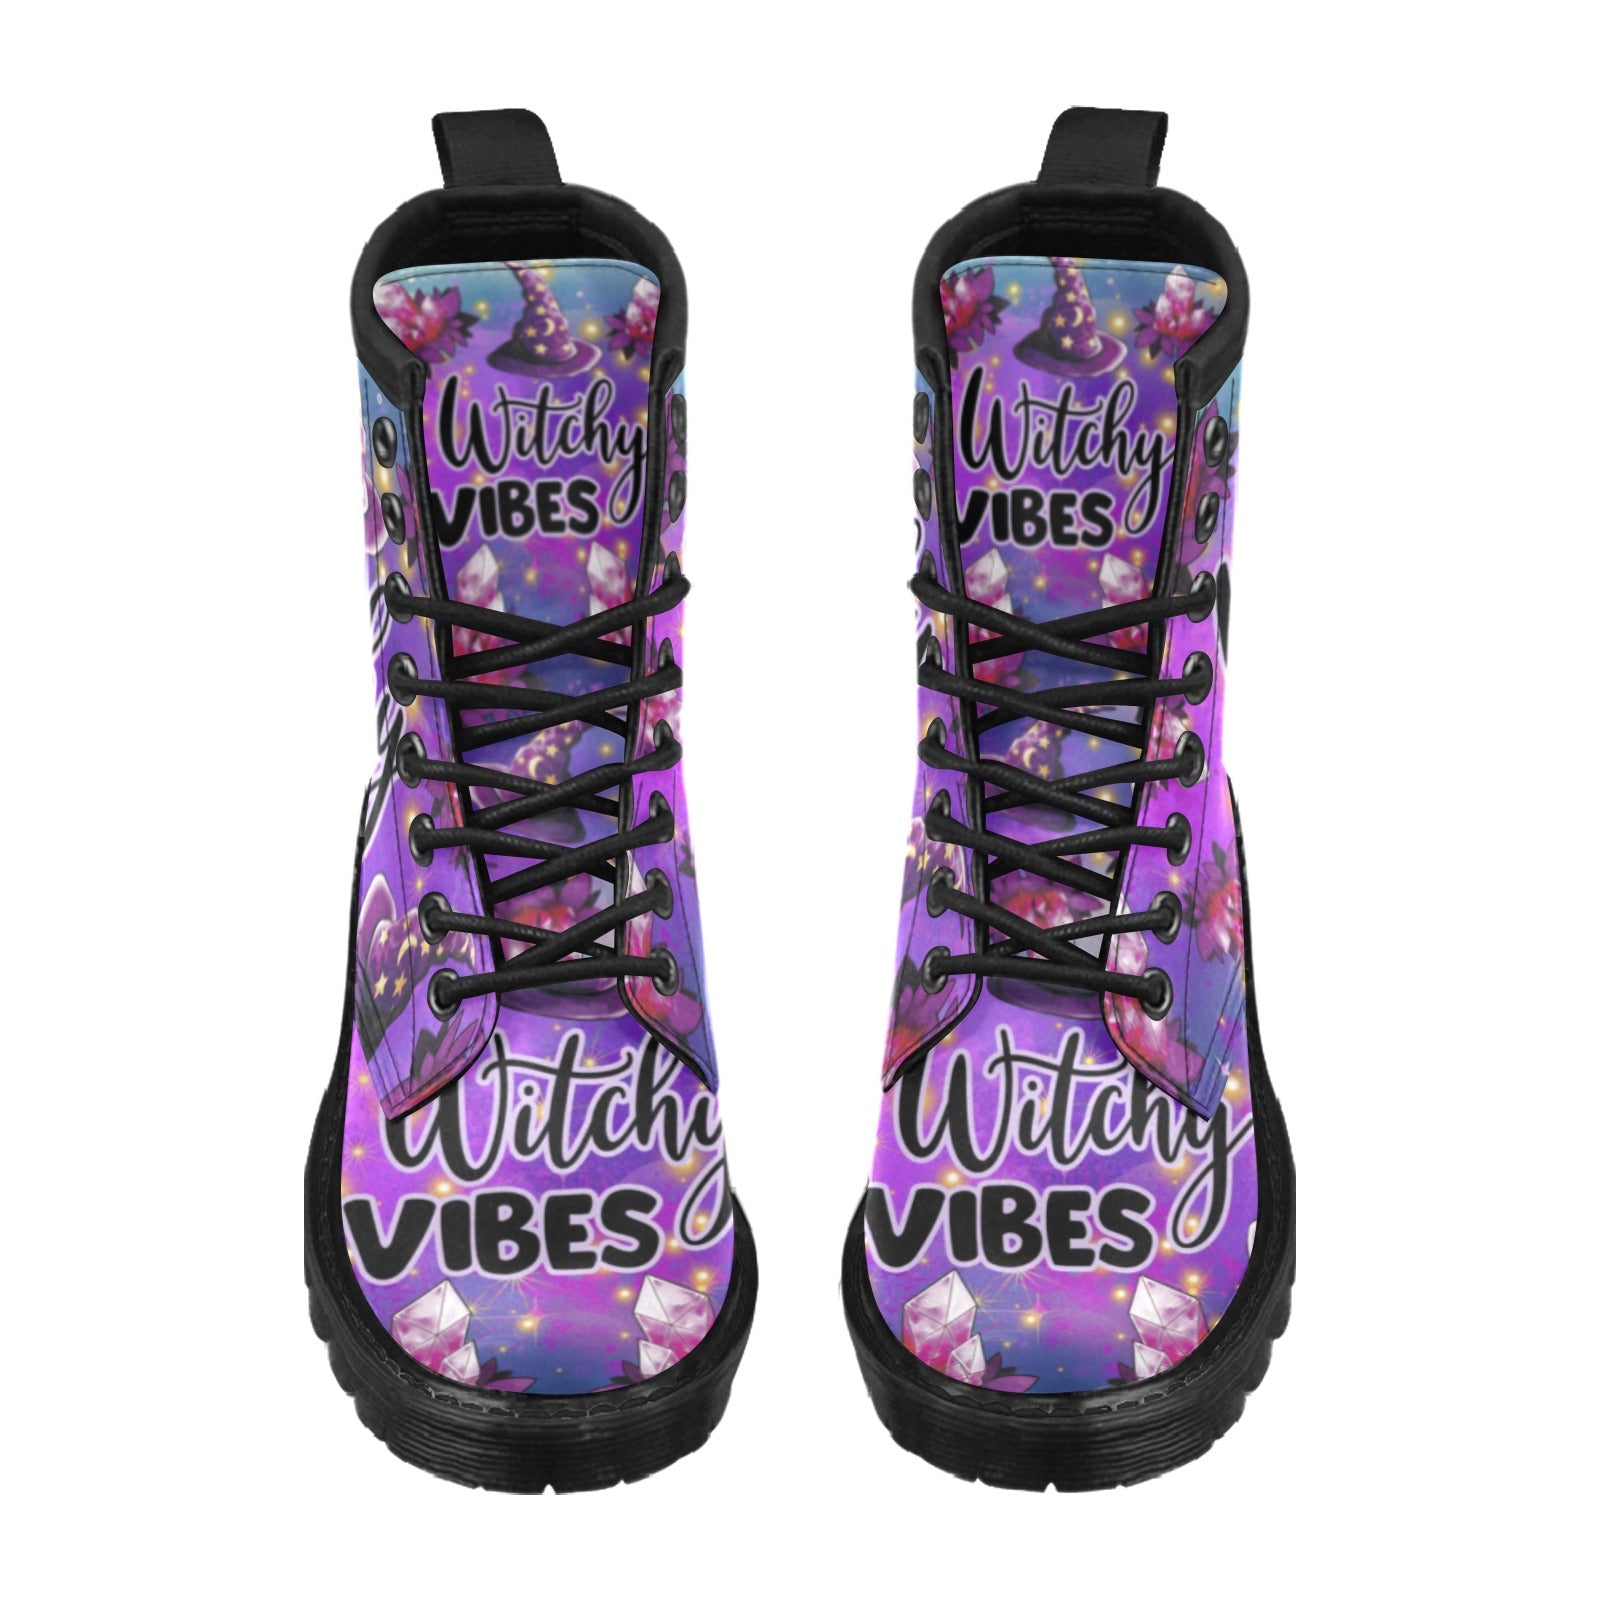 Witchy vibes Martin Boots-MoonChildWorld